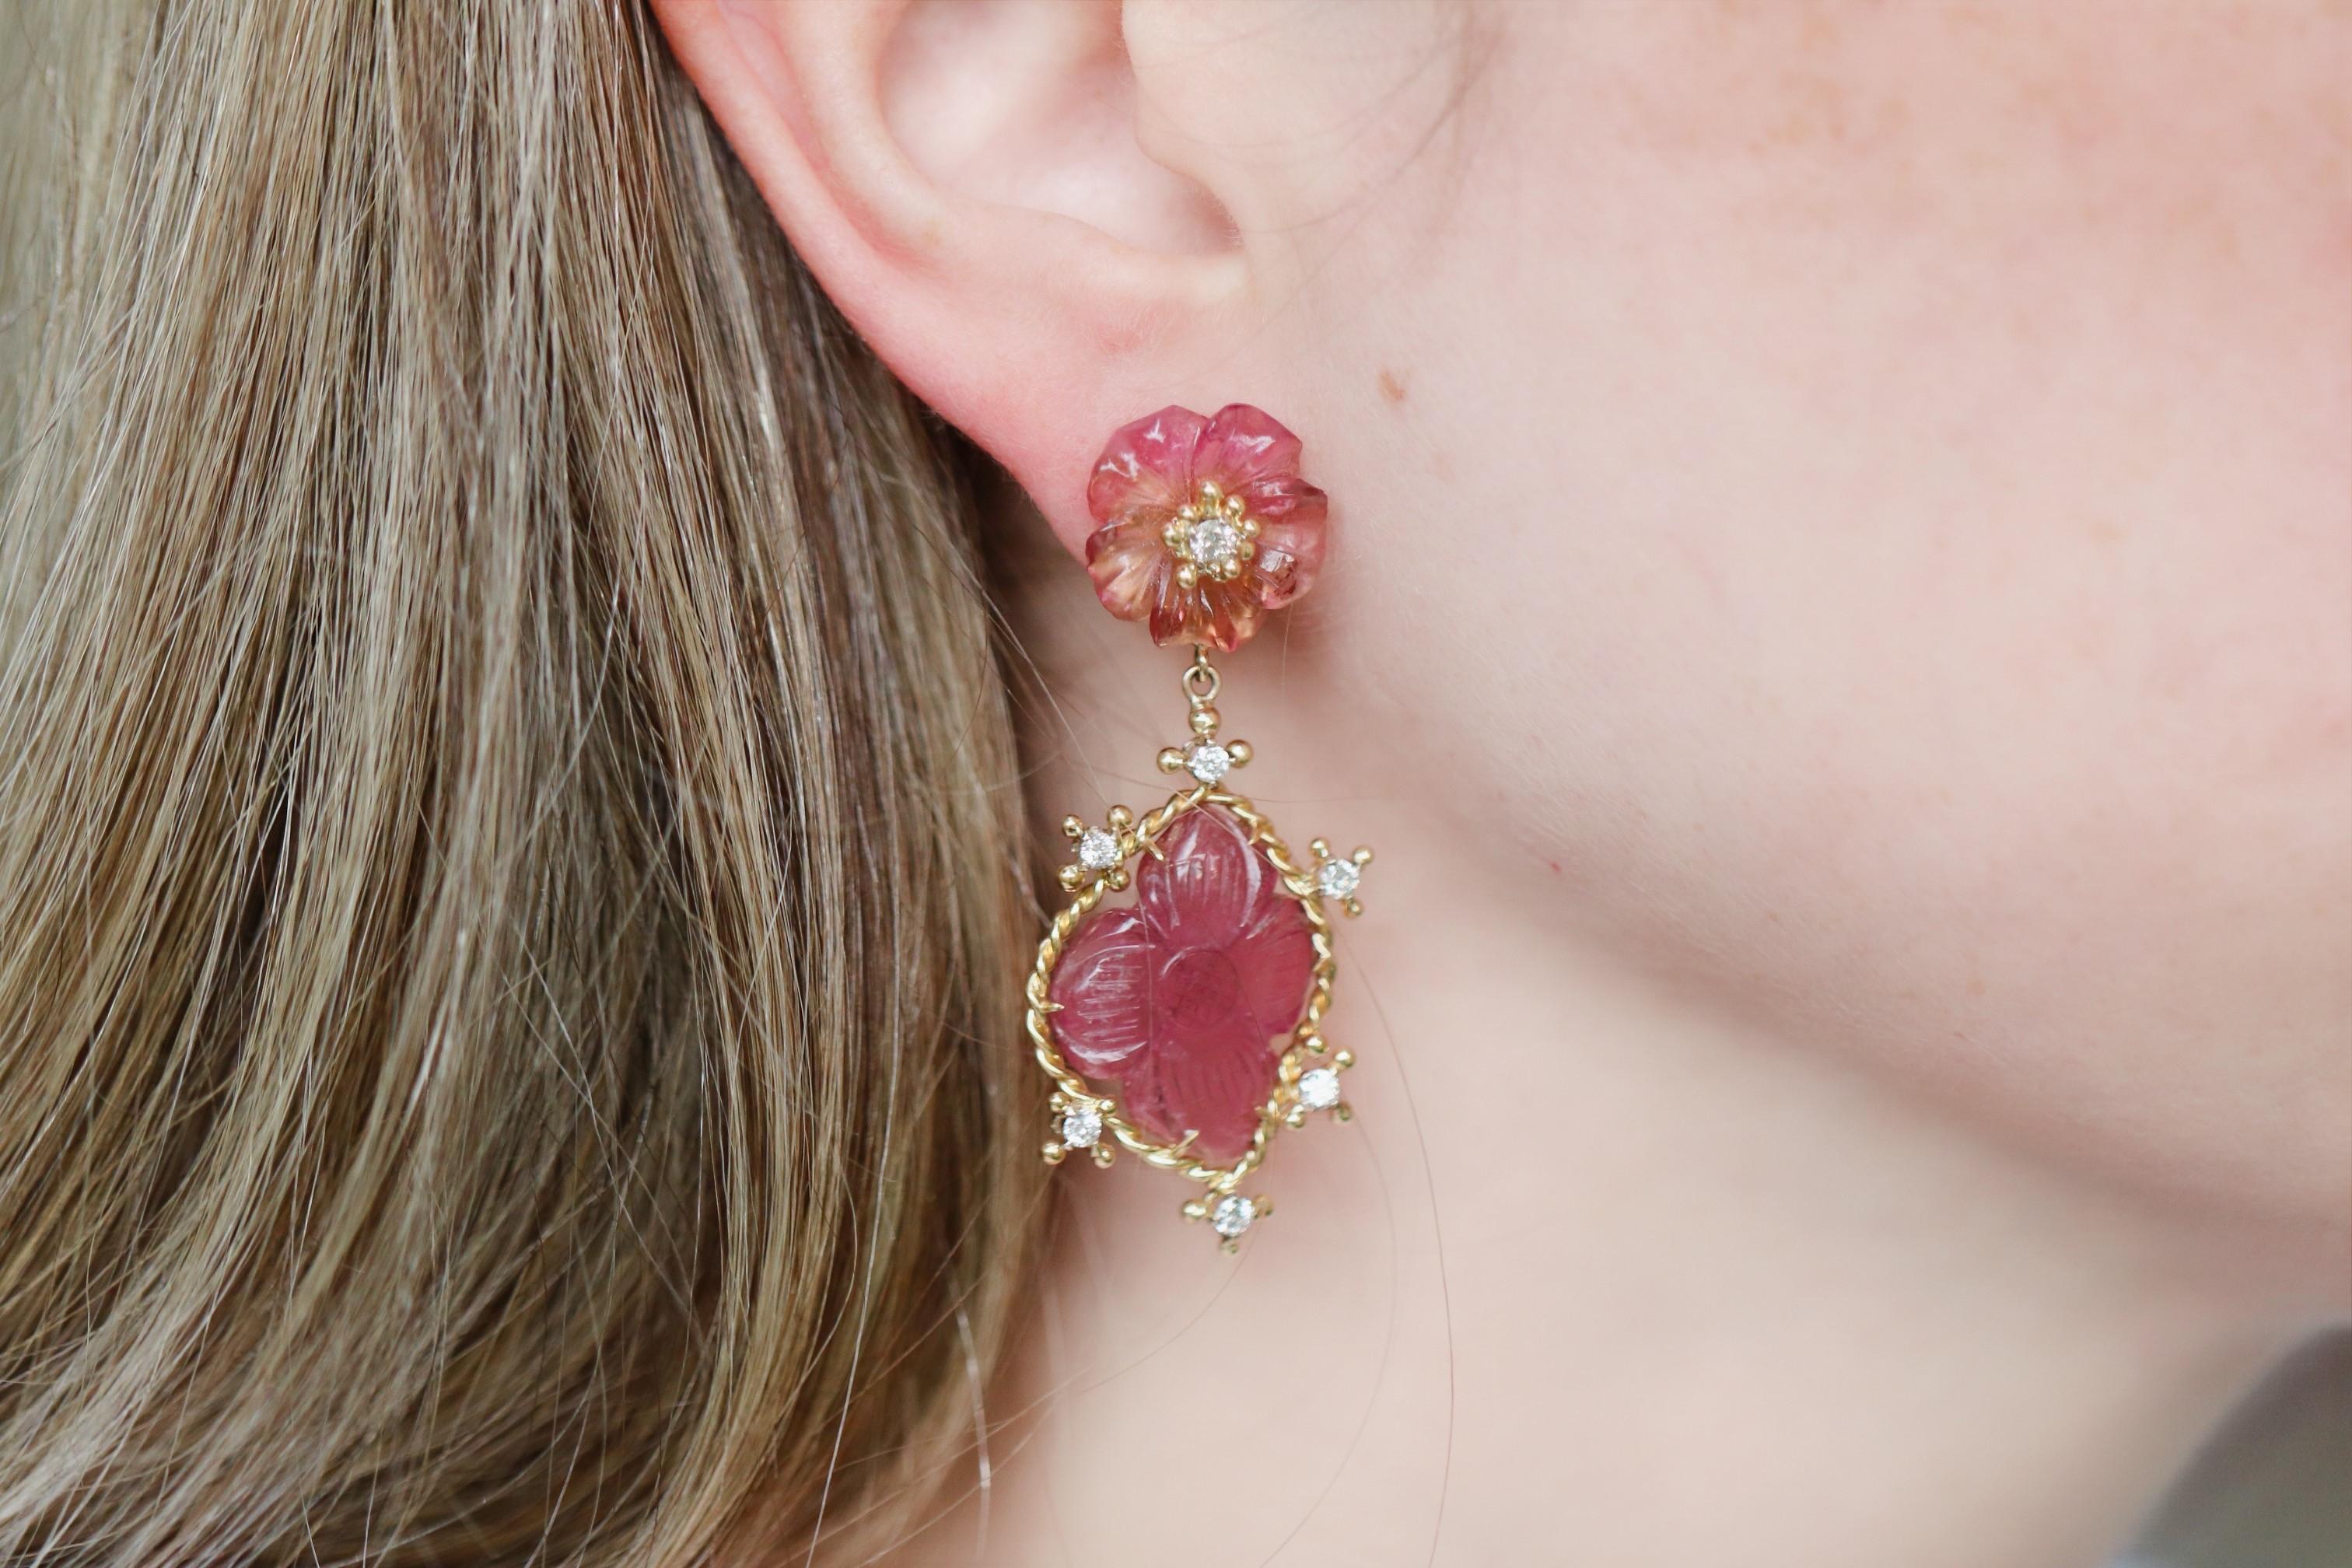 One of a Kind Petal Drop Earrings handmade in intricately-formed 18k yellow gold by jewelry artist Russell Trusso featuring four matched, hand-carved pink tourmaline flowers accented with round brilliant-cut white diamonds and finished on 18k yellow